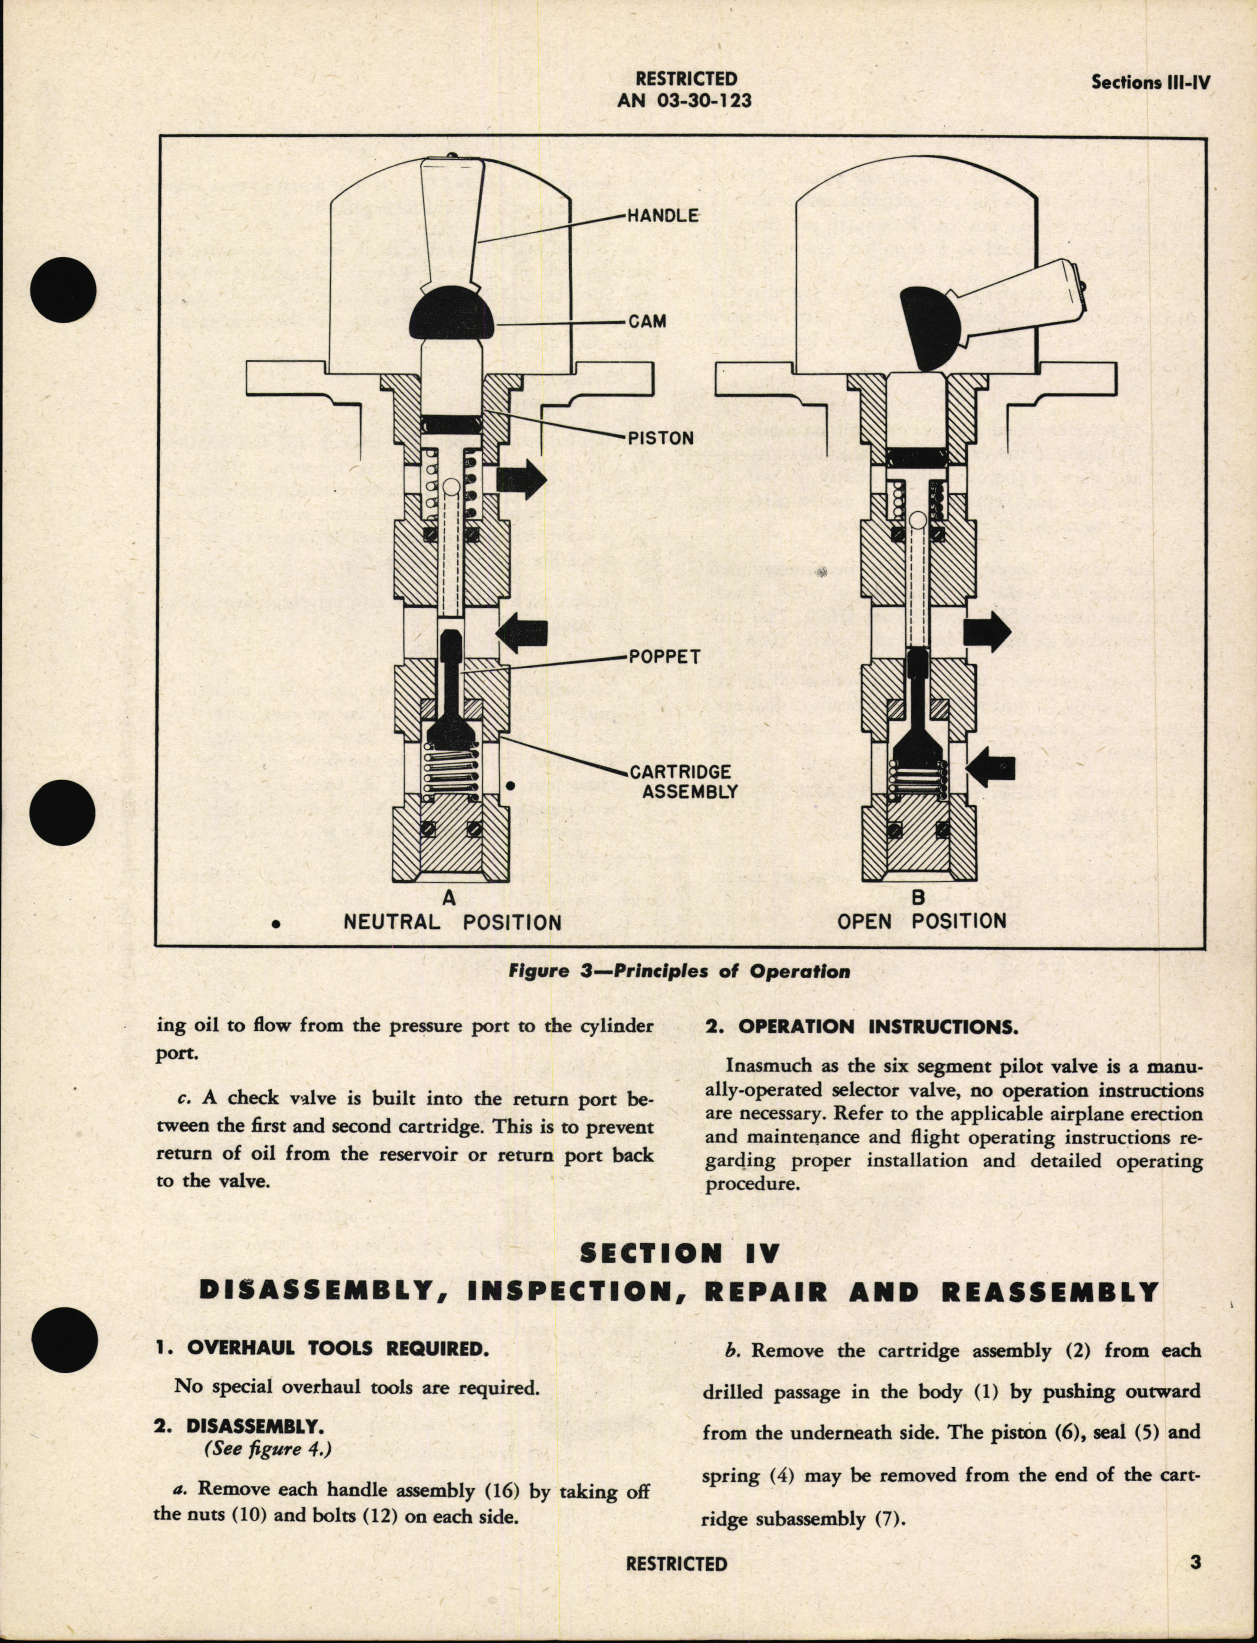 Sample page 7 from AirCorps Library document: Handbook of Overhaul Instructions with Parts Catalog for Six Segment Pilot Valve 404395